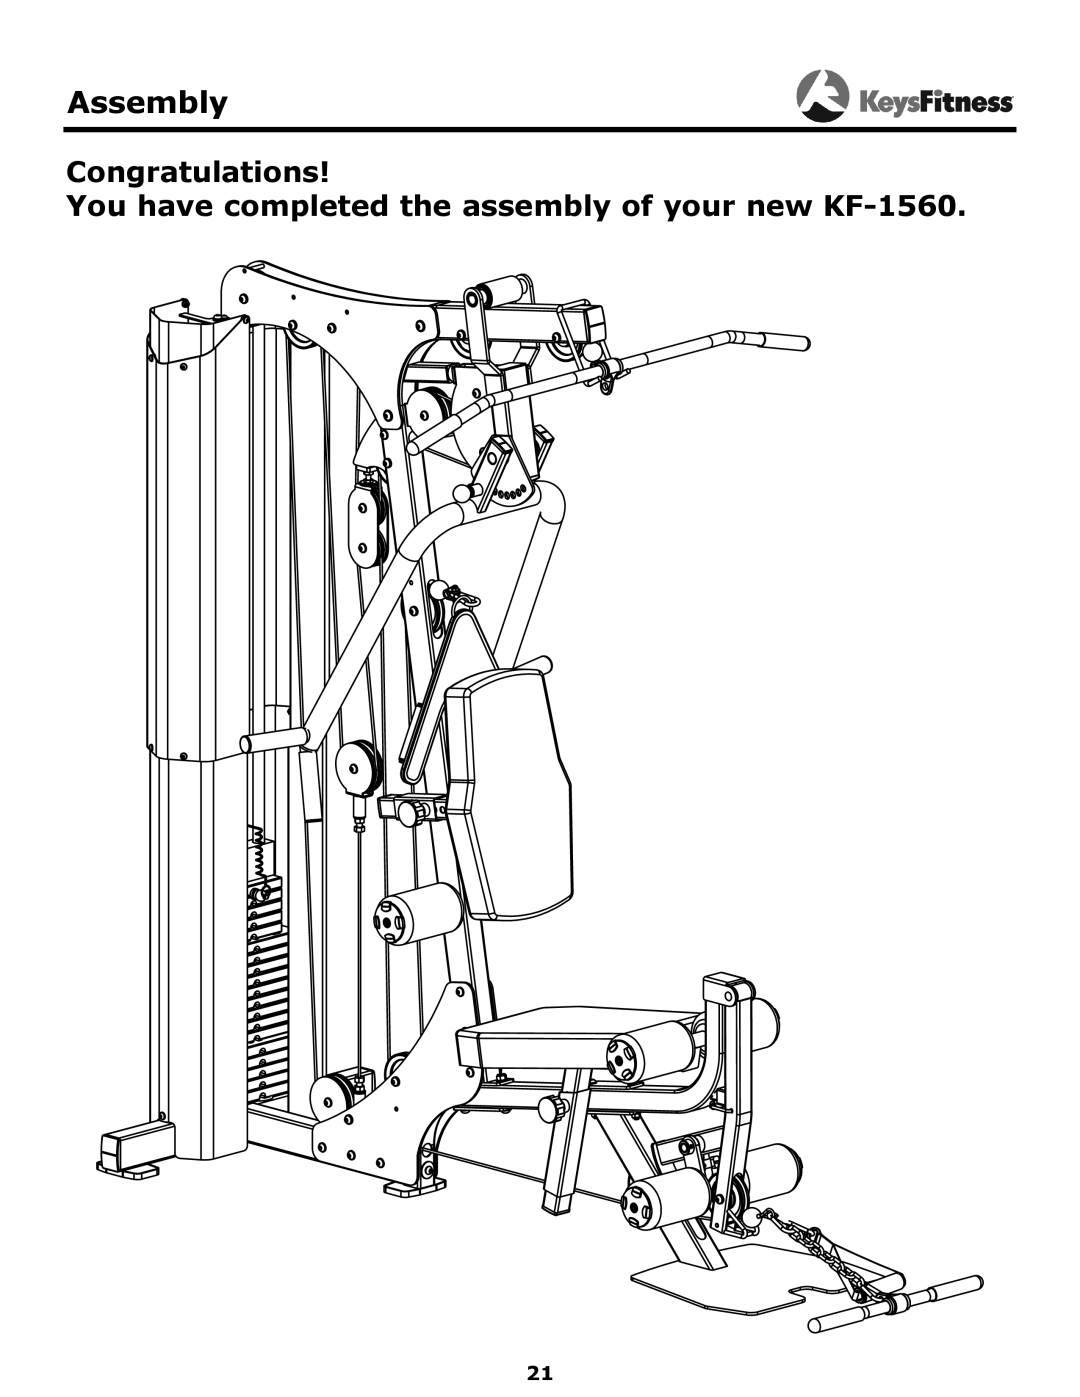 Keys Fitness owner manual Assembly, Congratulations You have completed the assembly of your new KF-1560 